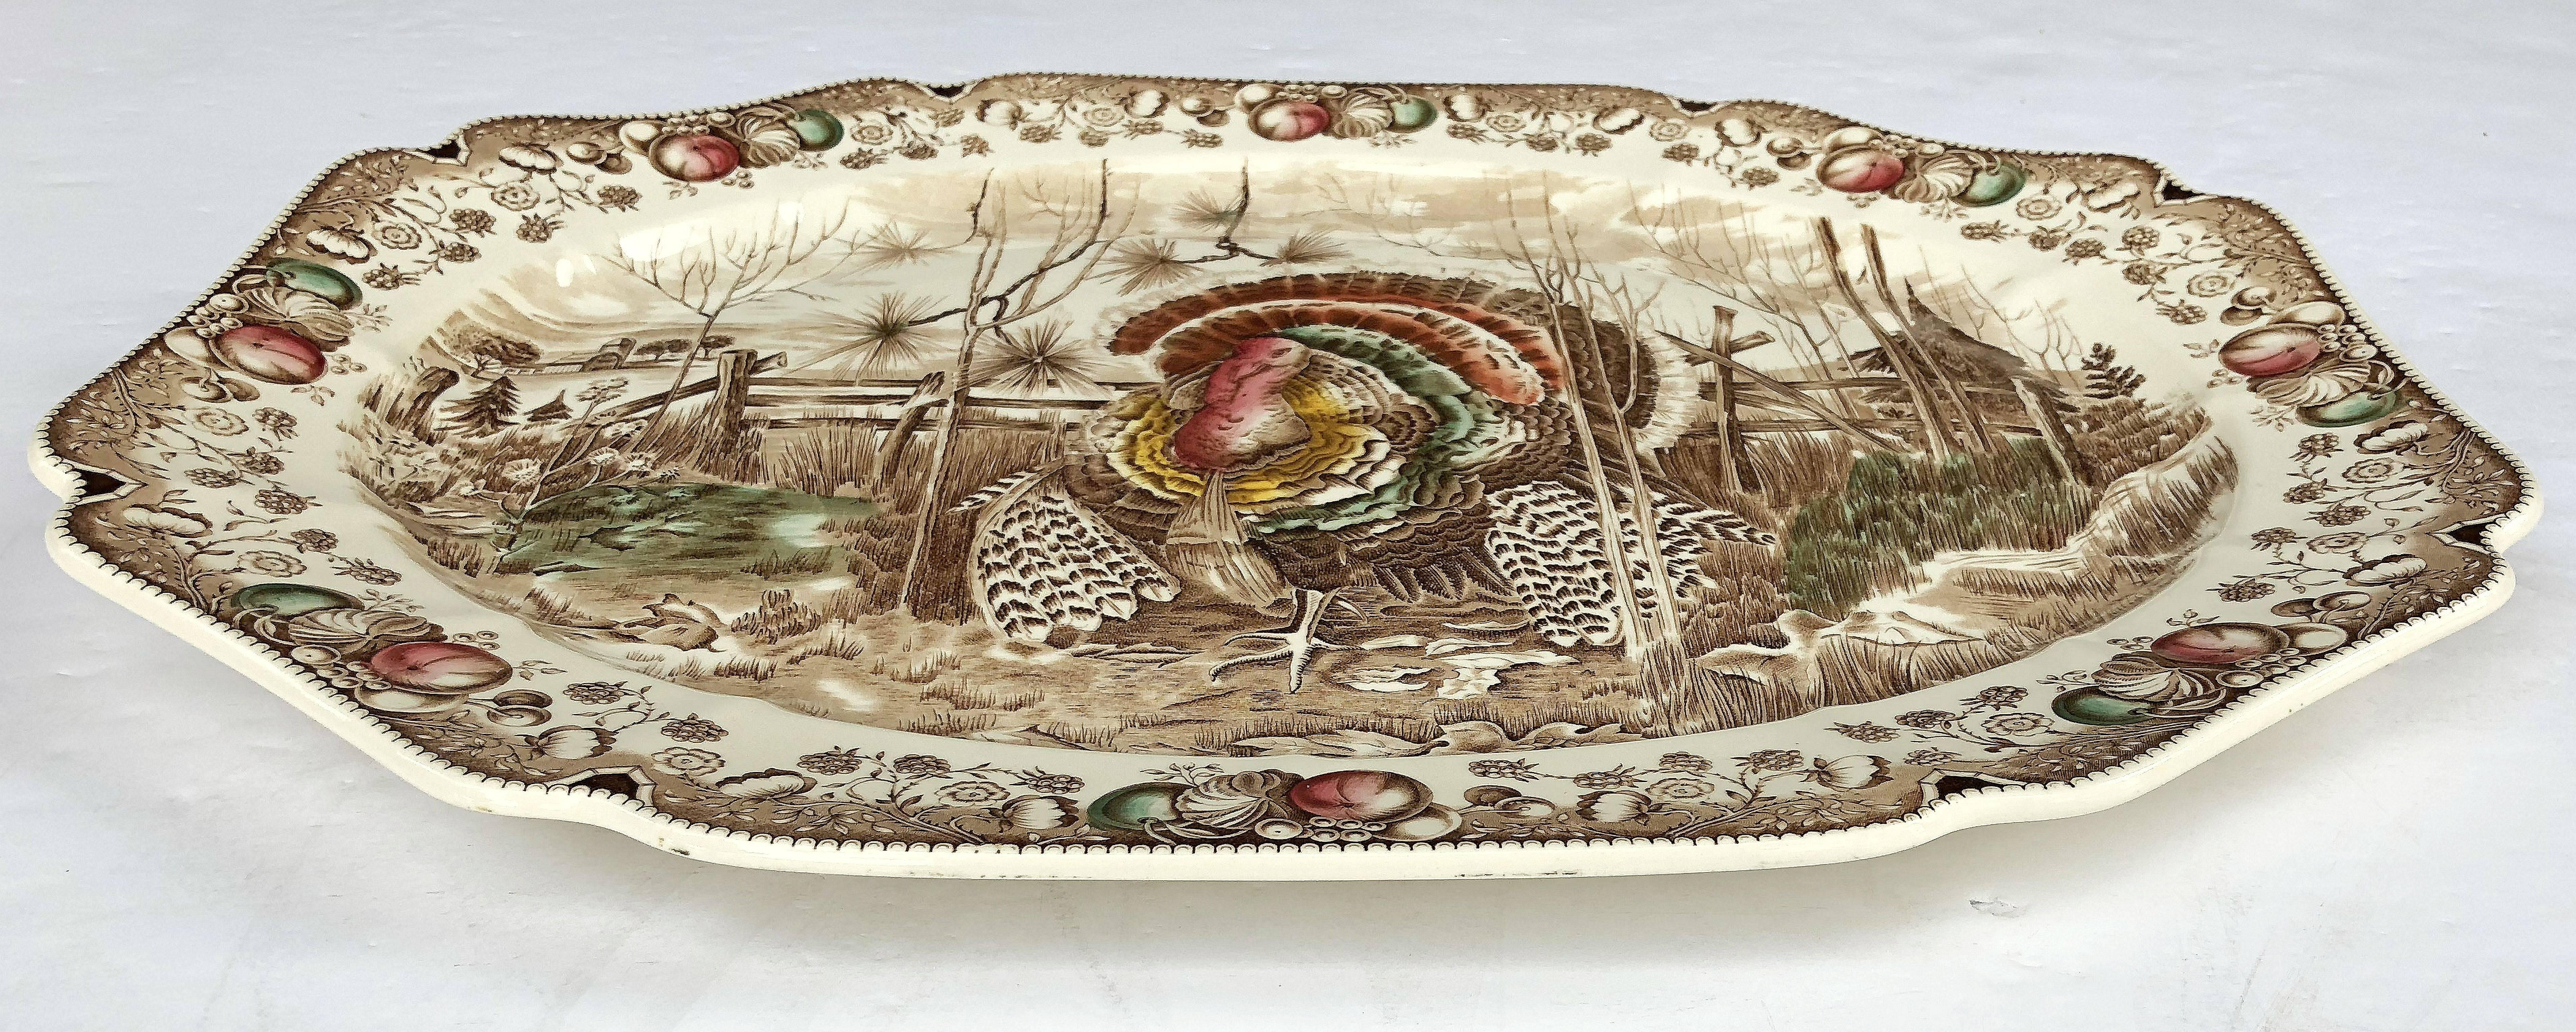 A large vintage serving platter featuring the Wild Turkey, his majesty brown and white transfer-ware pattern by the celebrated English pottery firm, Johnson Brothers.

With authentic midcentury brown label on reverse.

Perfect for the